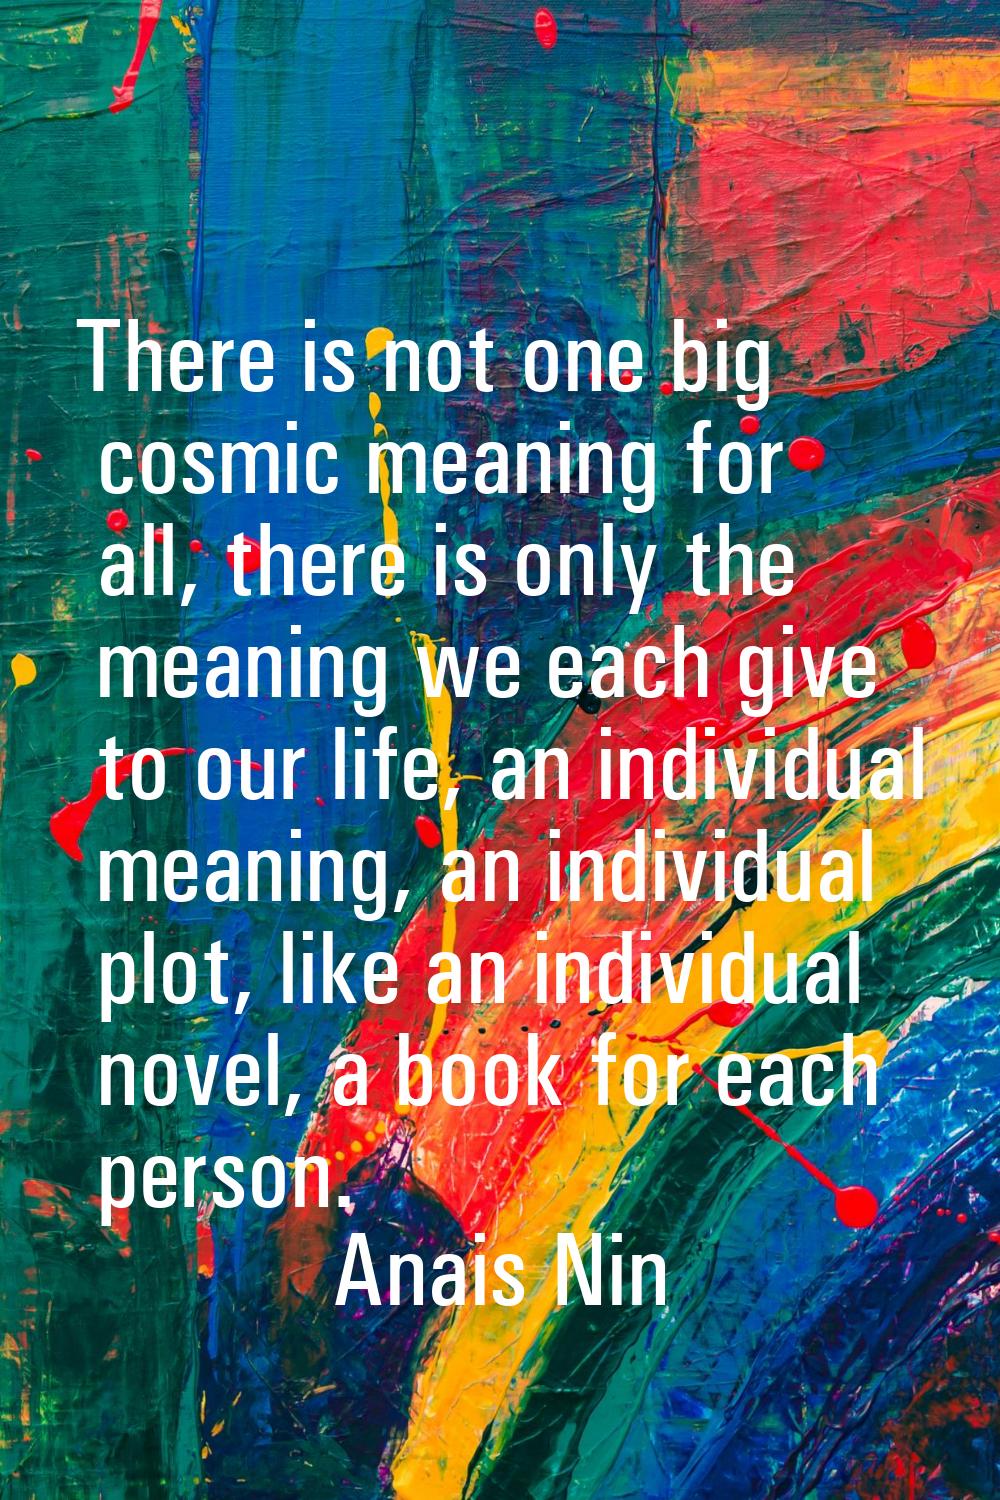 There is not one big cosmic meaning for all, there is only the meaning we each give to our life, an